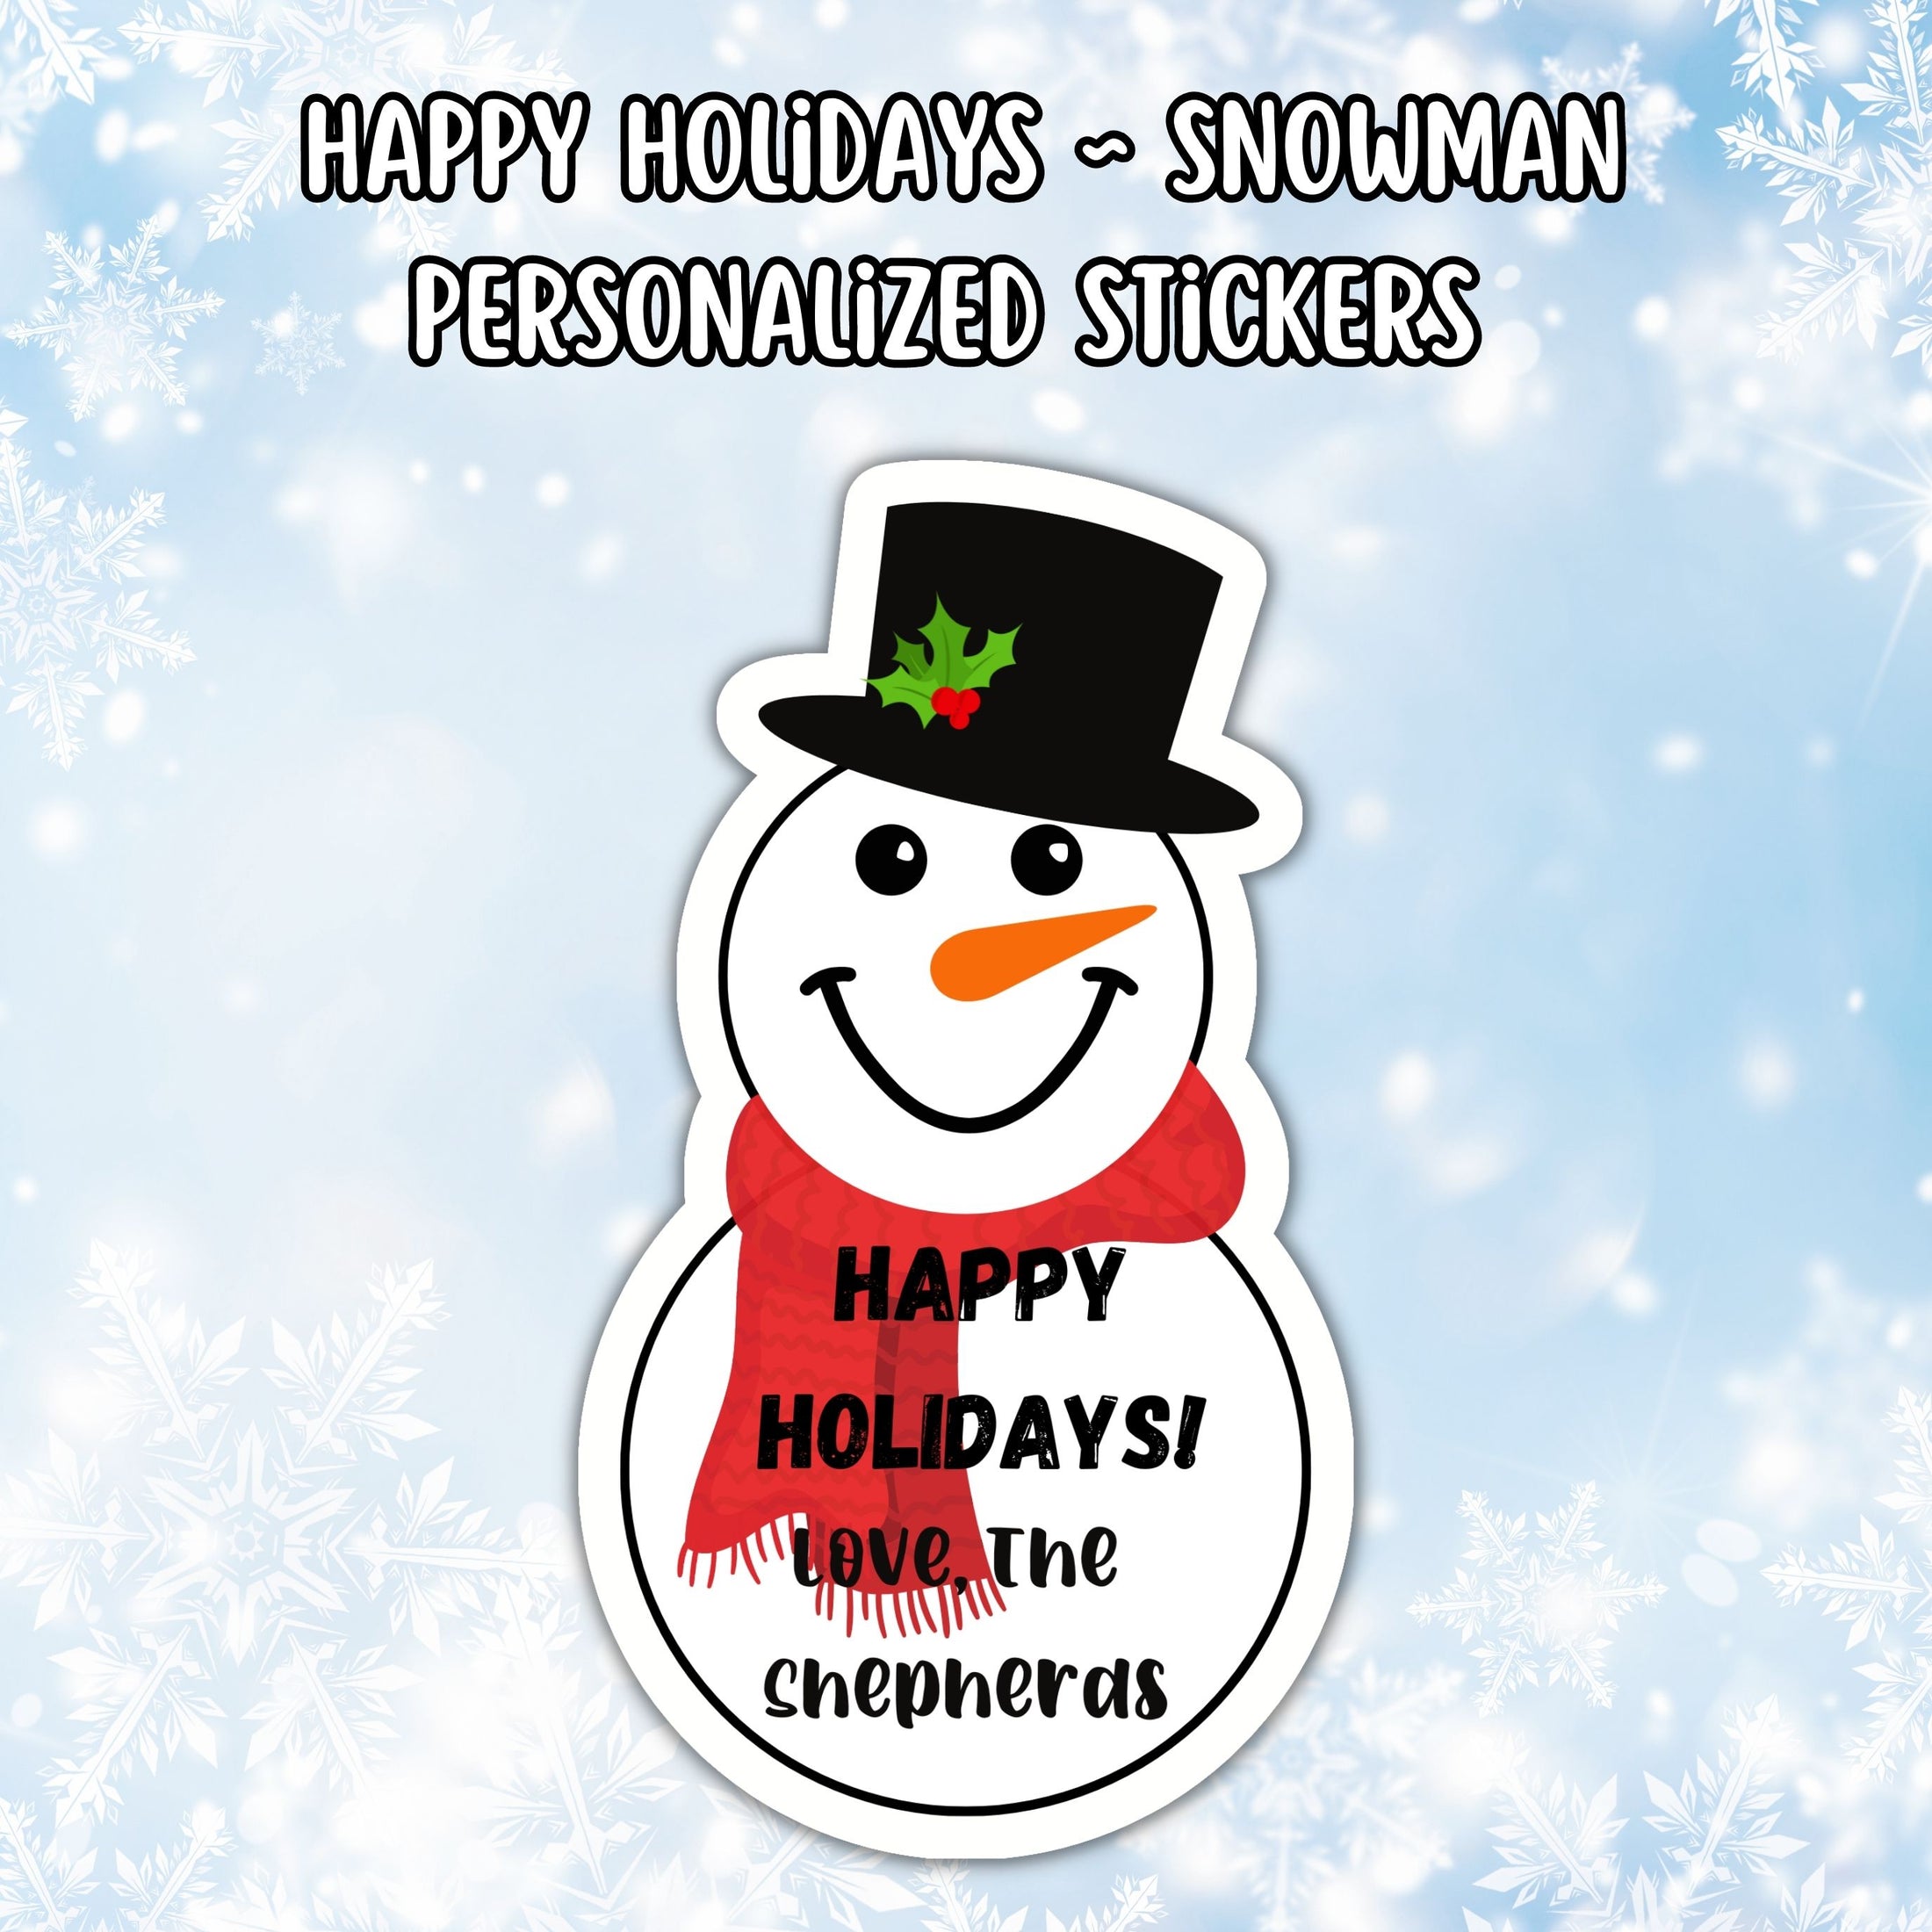 This cover page shows the personalized holiday sticker on a snowflake background.